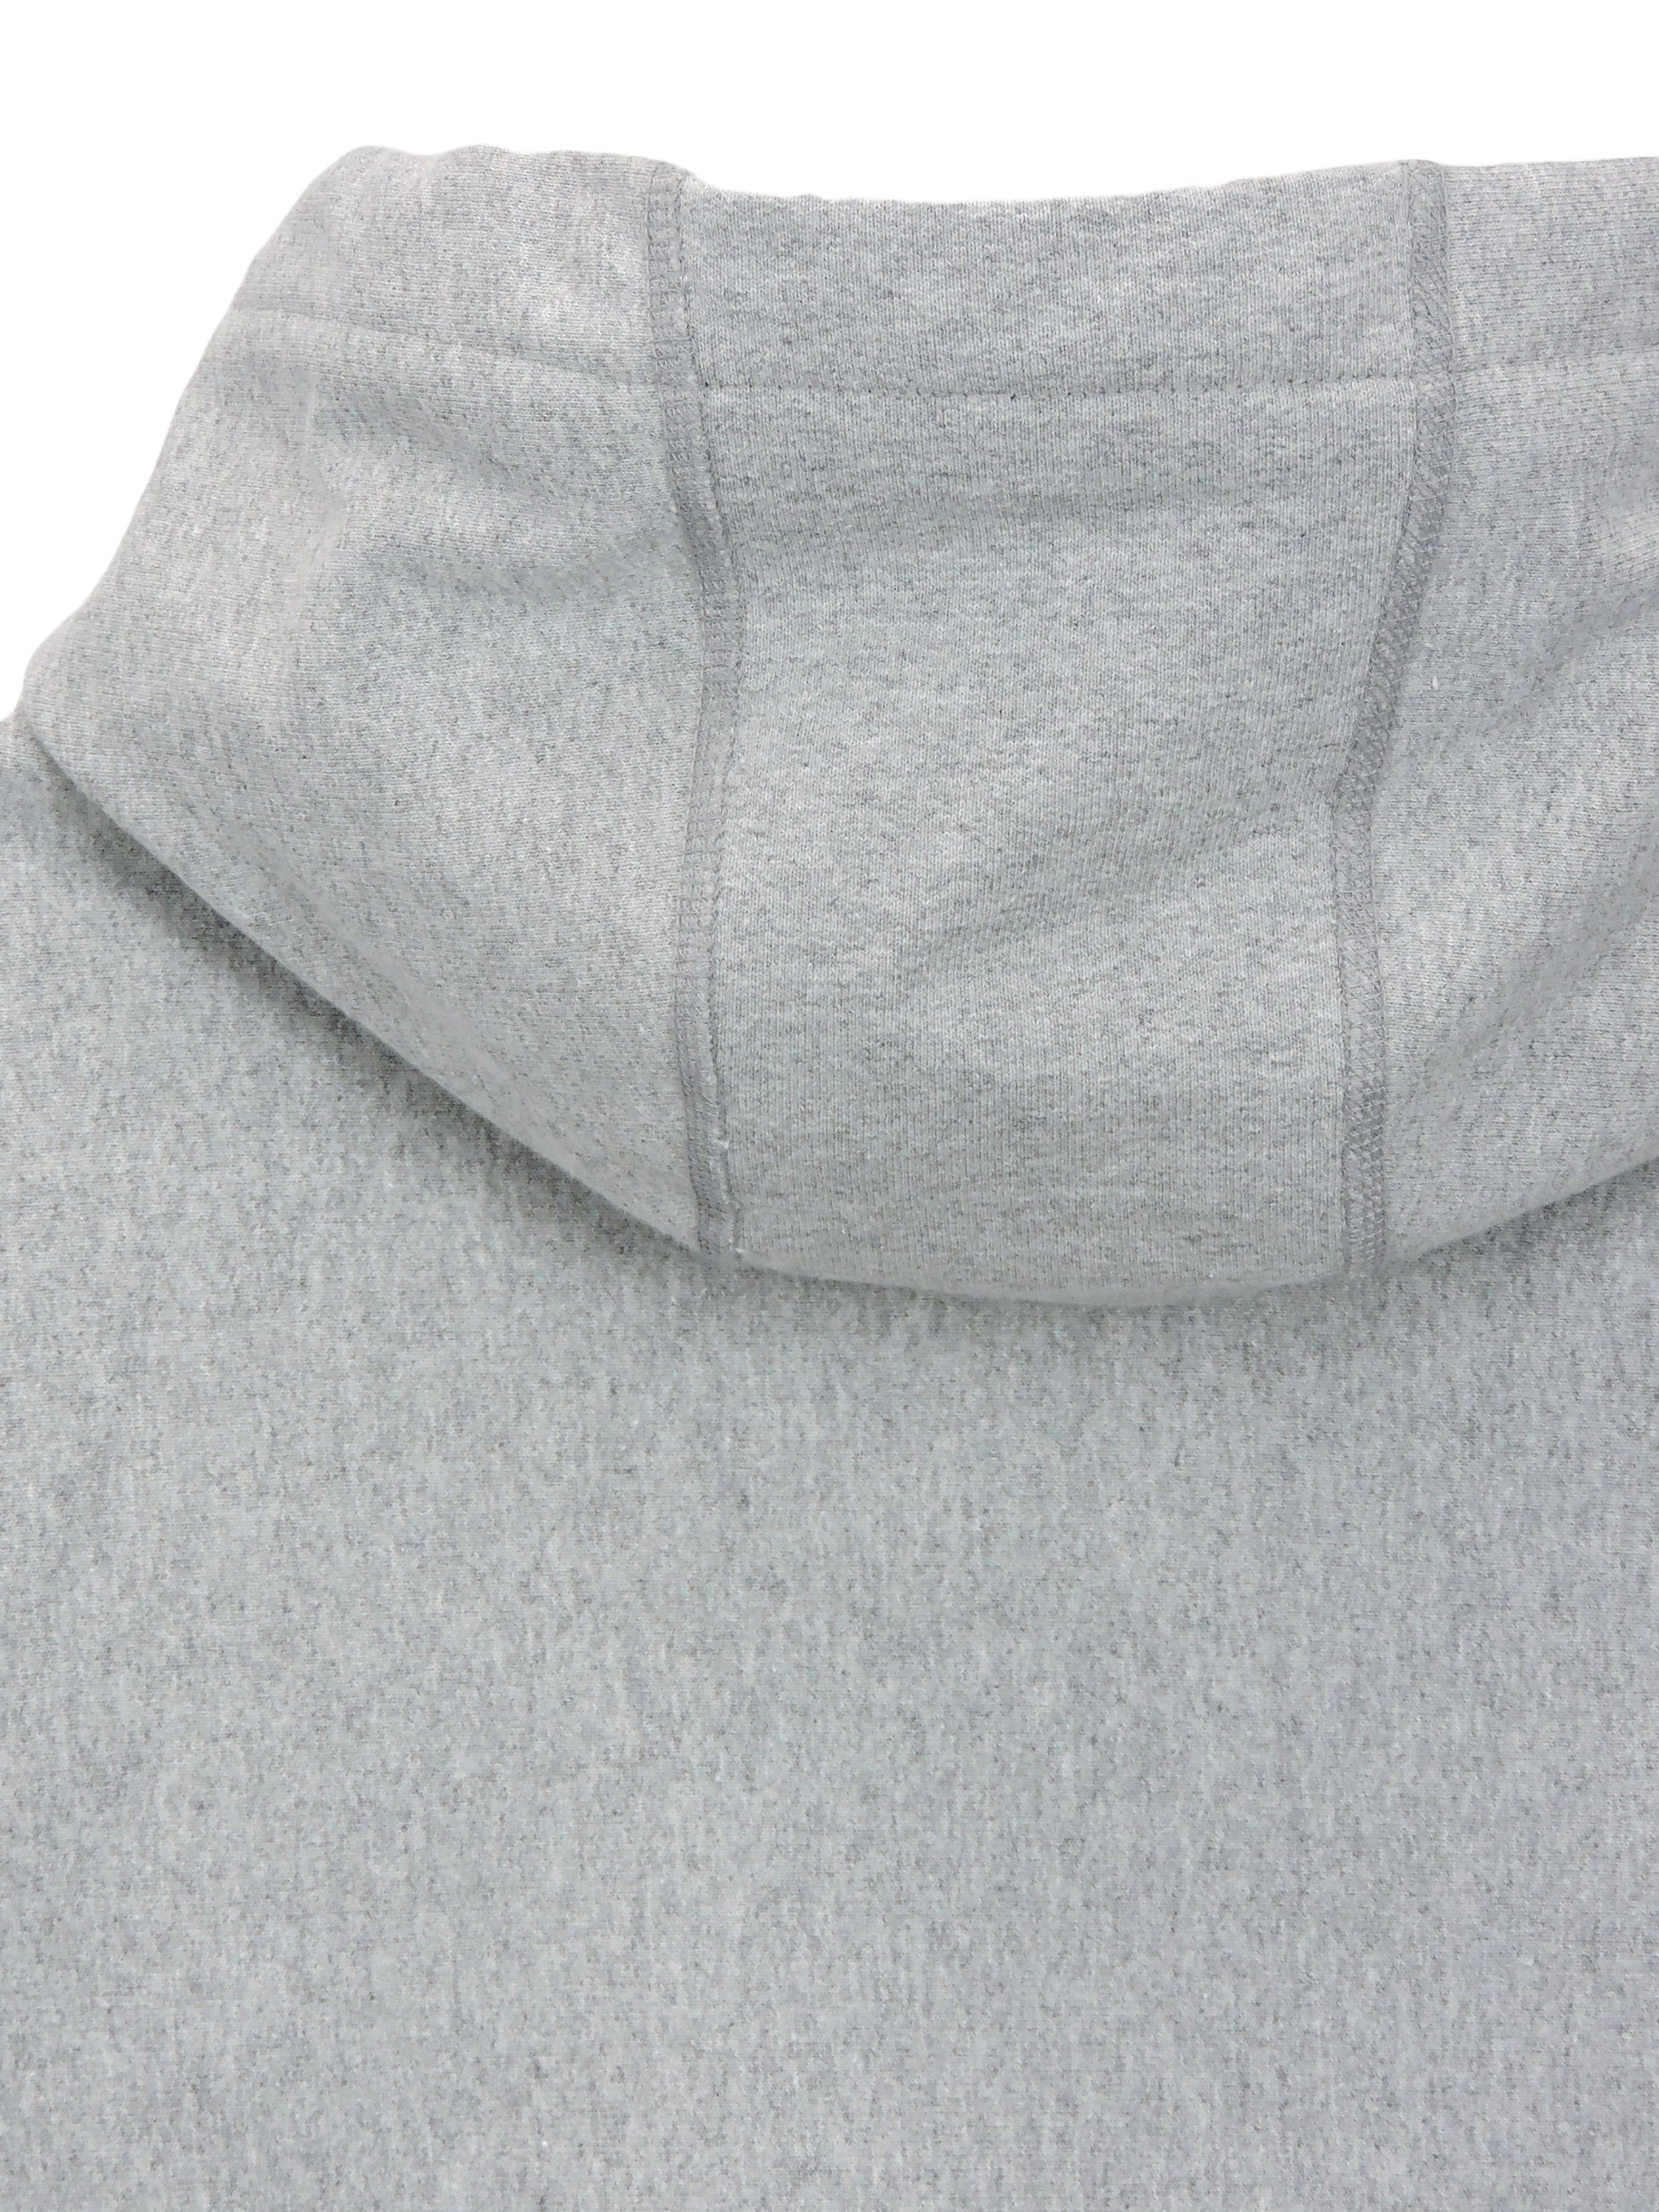 Close up of Hood and rear fabric